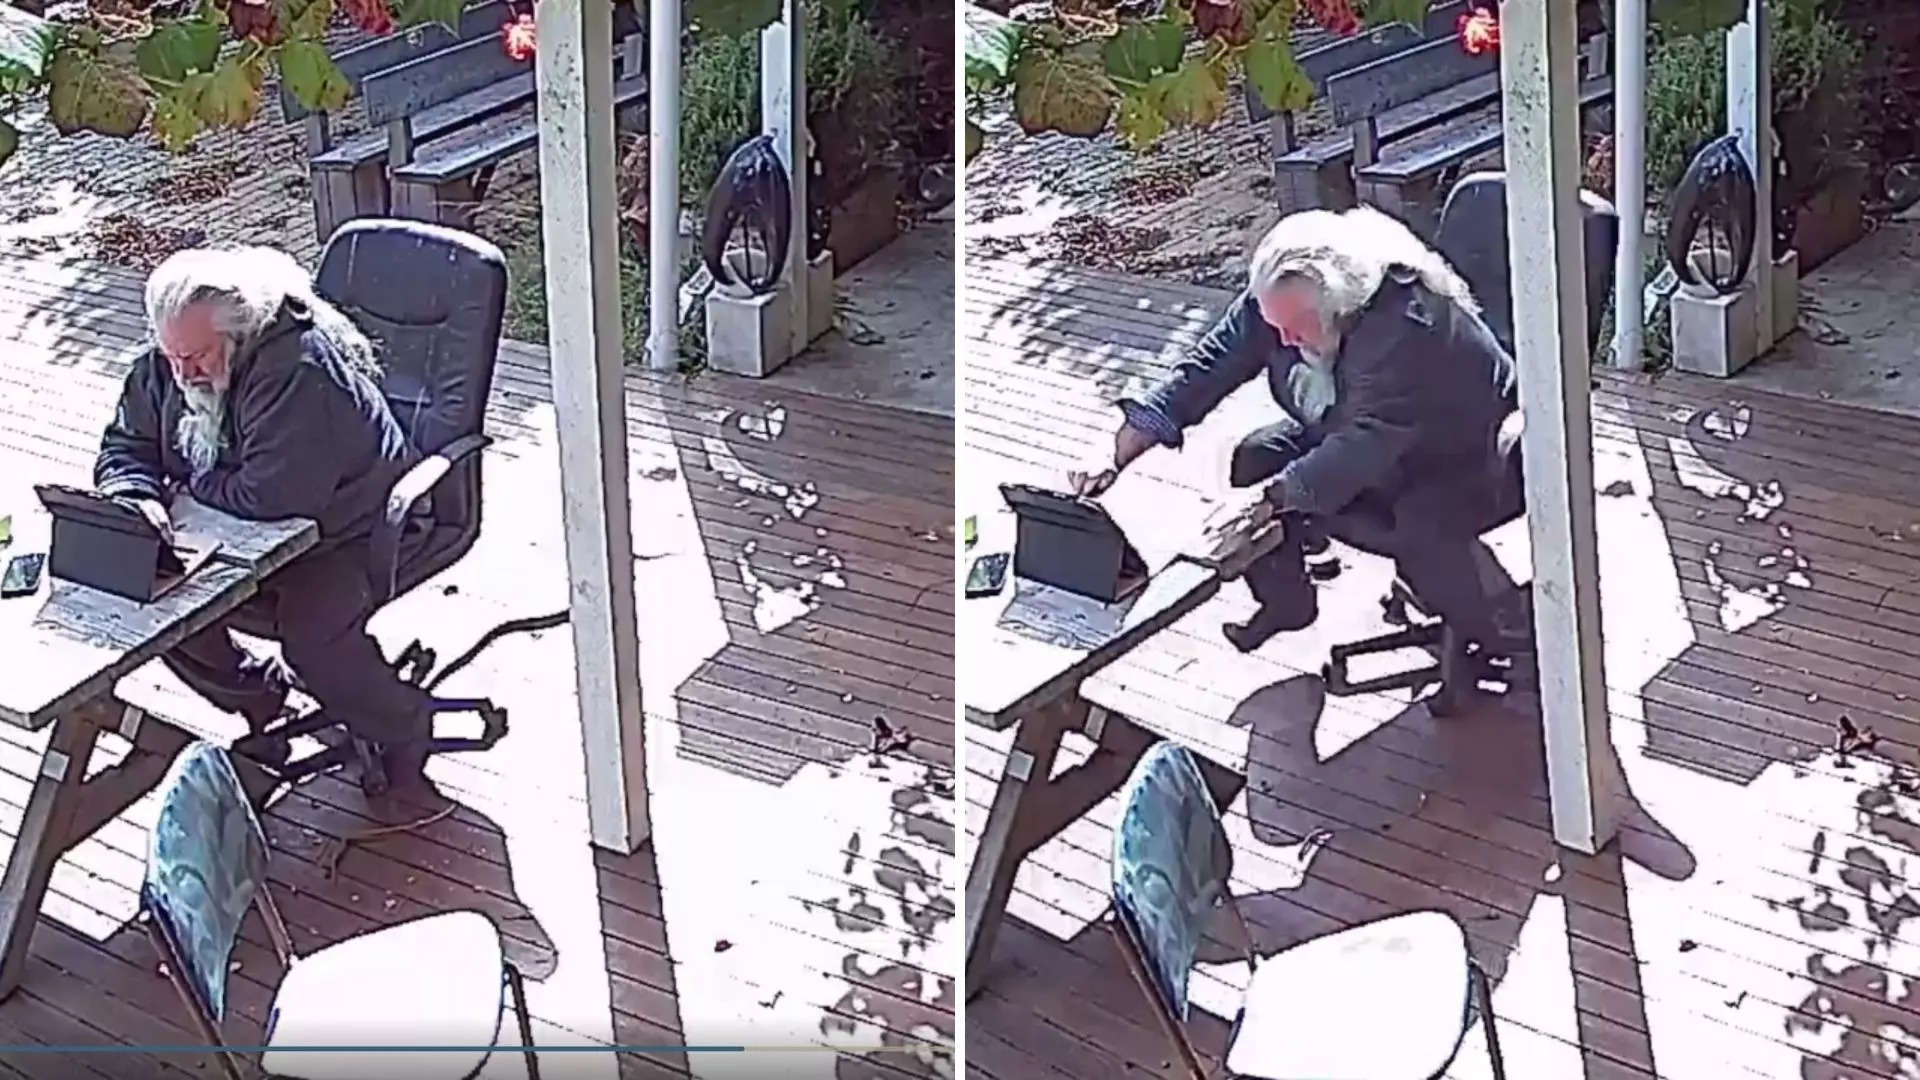 Gippslands Malcolm had an unexpected encounter on his deck  Image Reddit